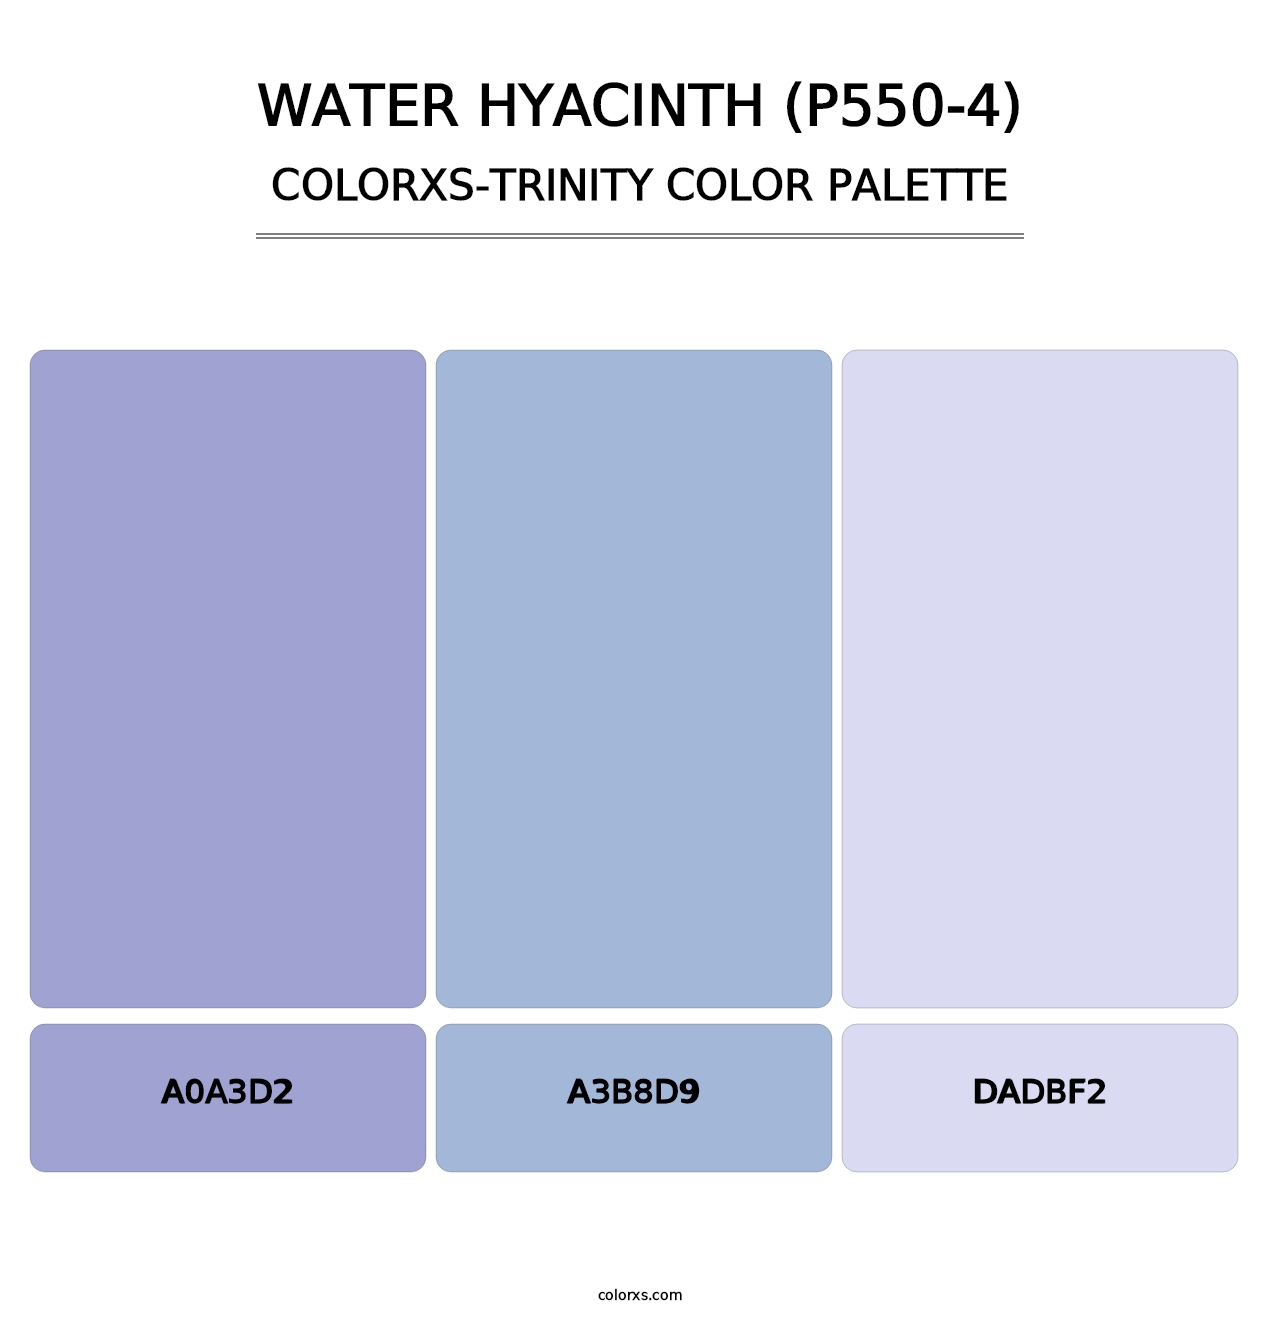 Water Hyacinth (P550-4) - Colorxs Trinity Palette